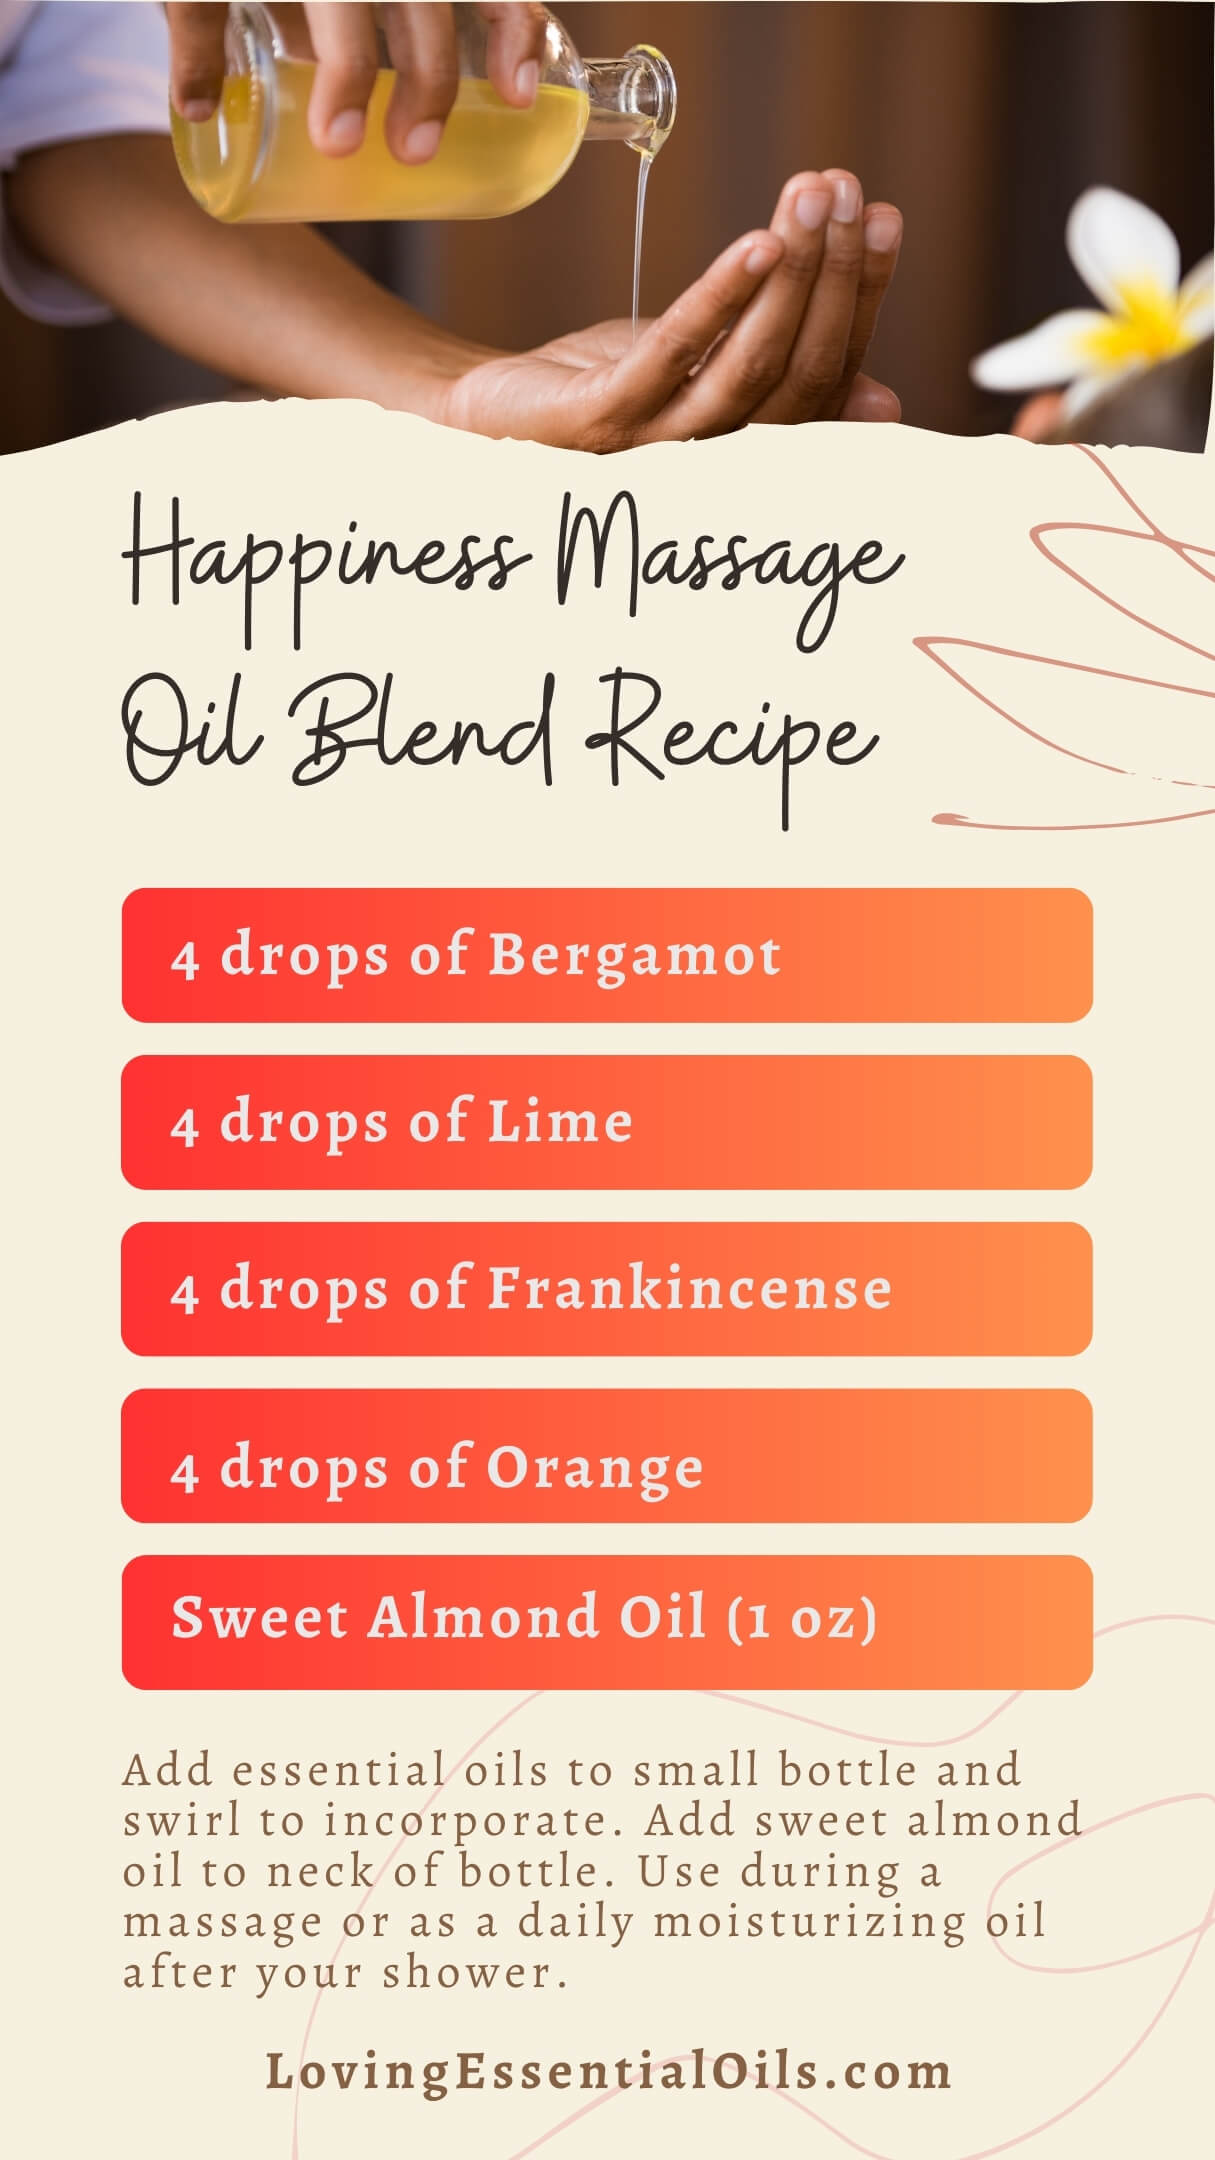 Happiness Massage Oil Blend Recipe by Loving Essential Oils